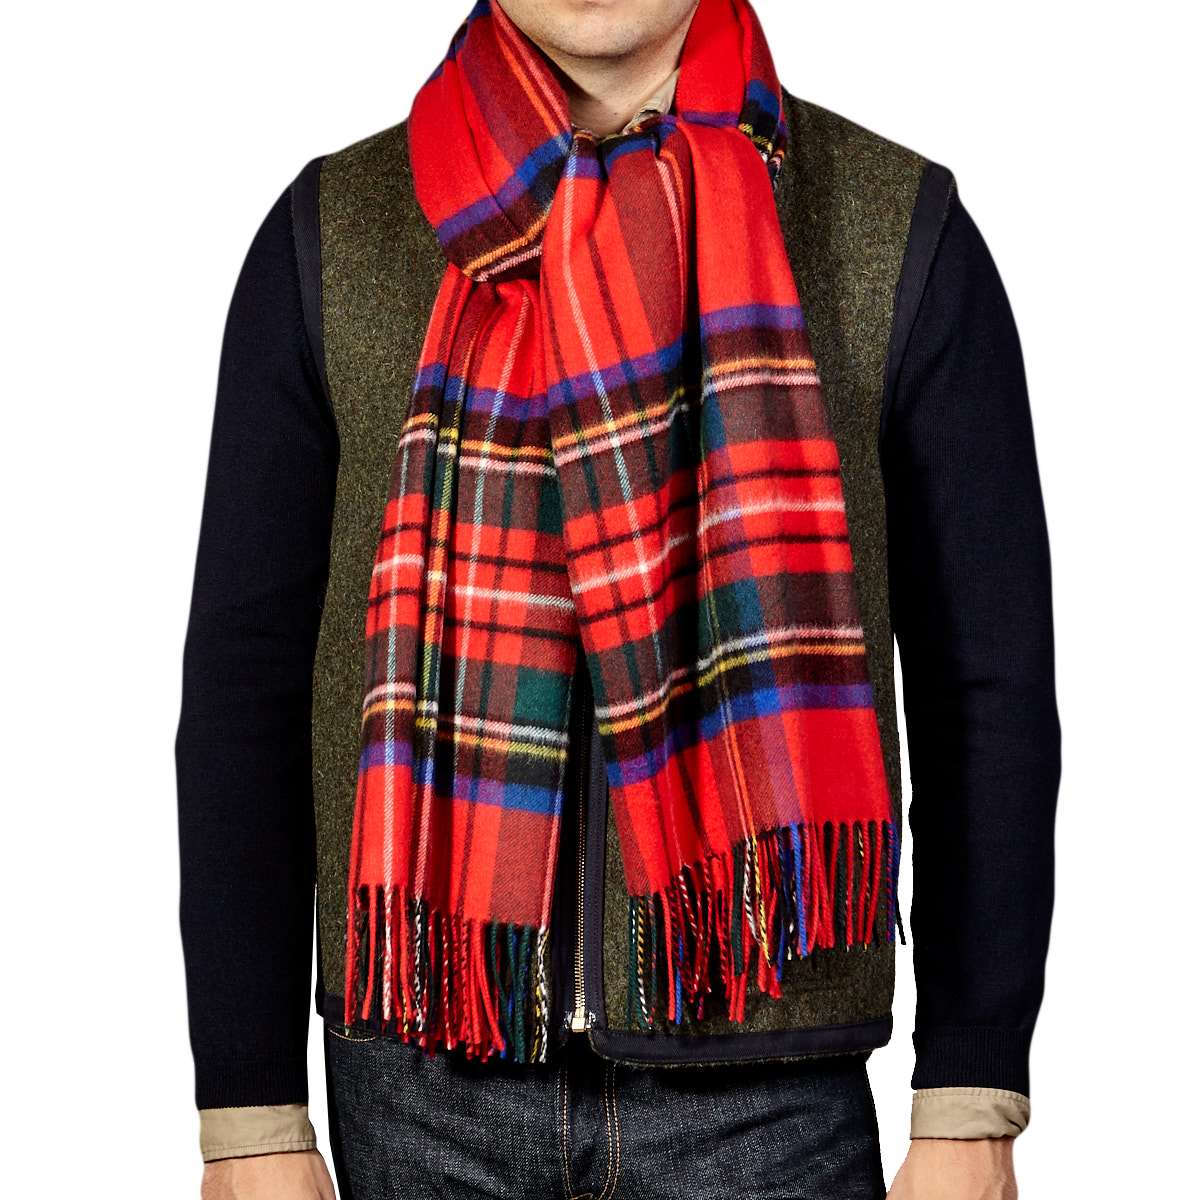 A man wearing a Red Checked Royal Stewart Cashmere Scarf by Johnstons of Elgin.